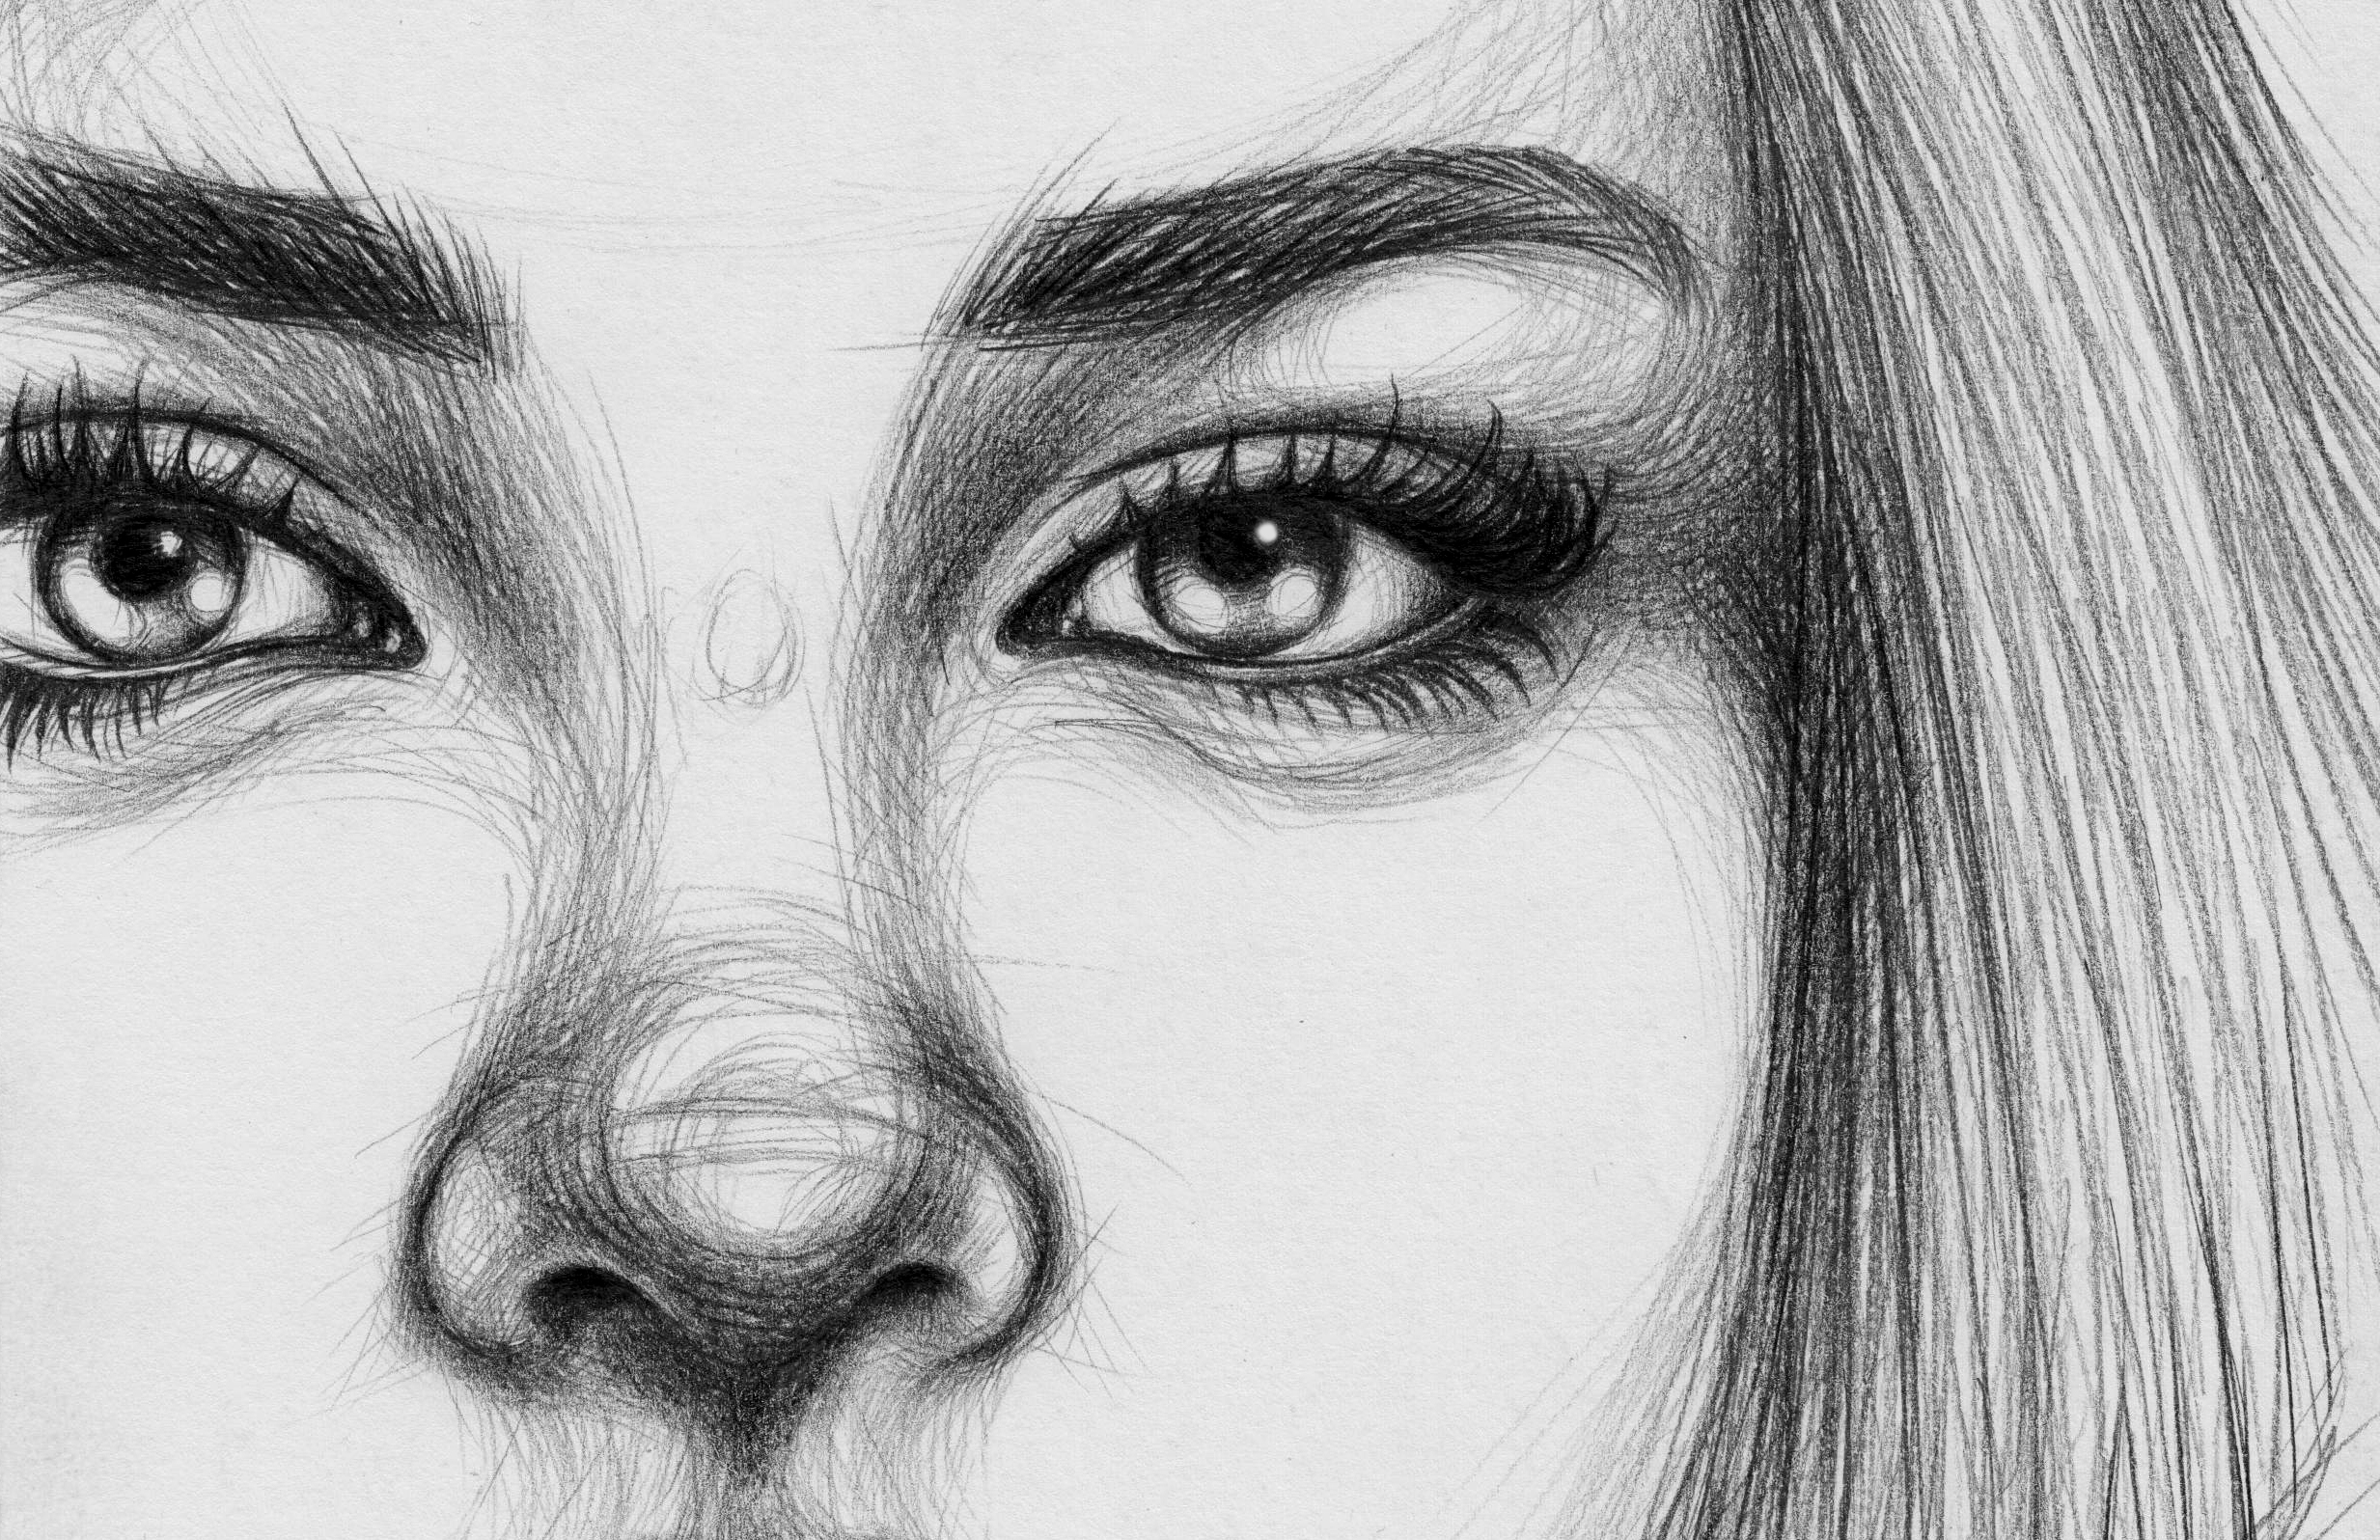 How to Draw a Realistic Face | Drawing Tutorial Part 1: Eyes, Nose + Mouth  - YouTube